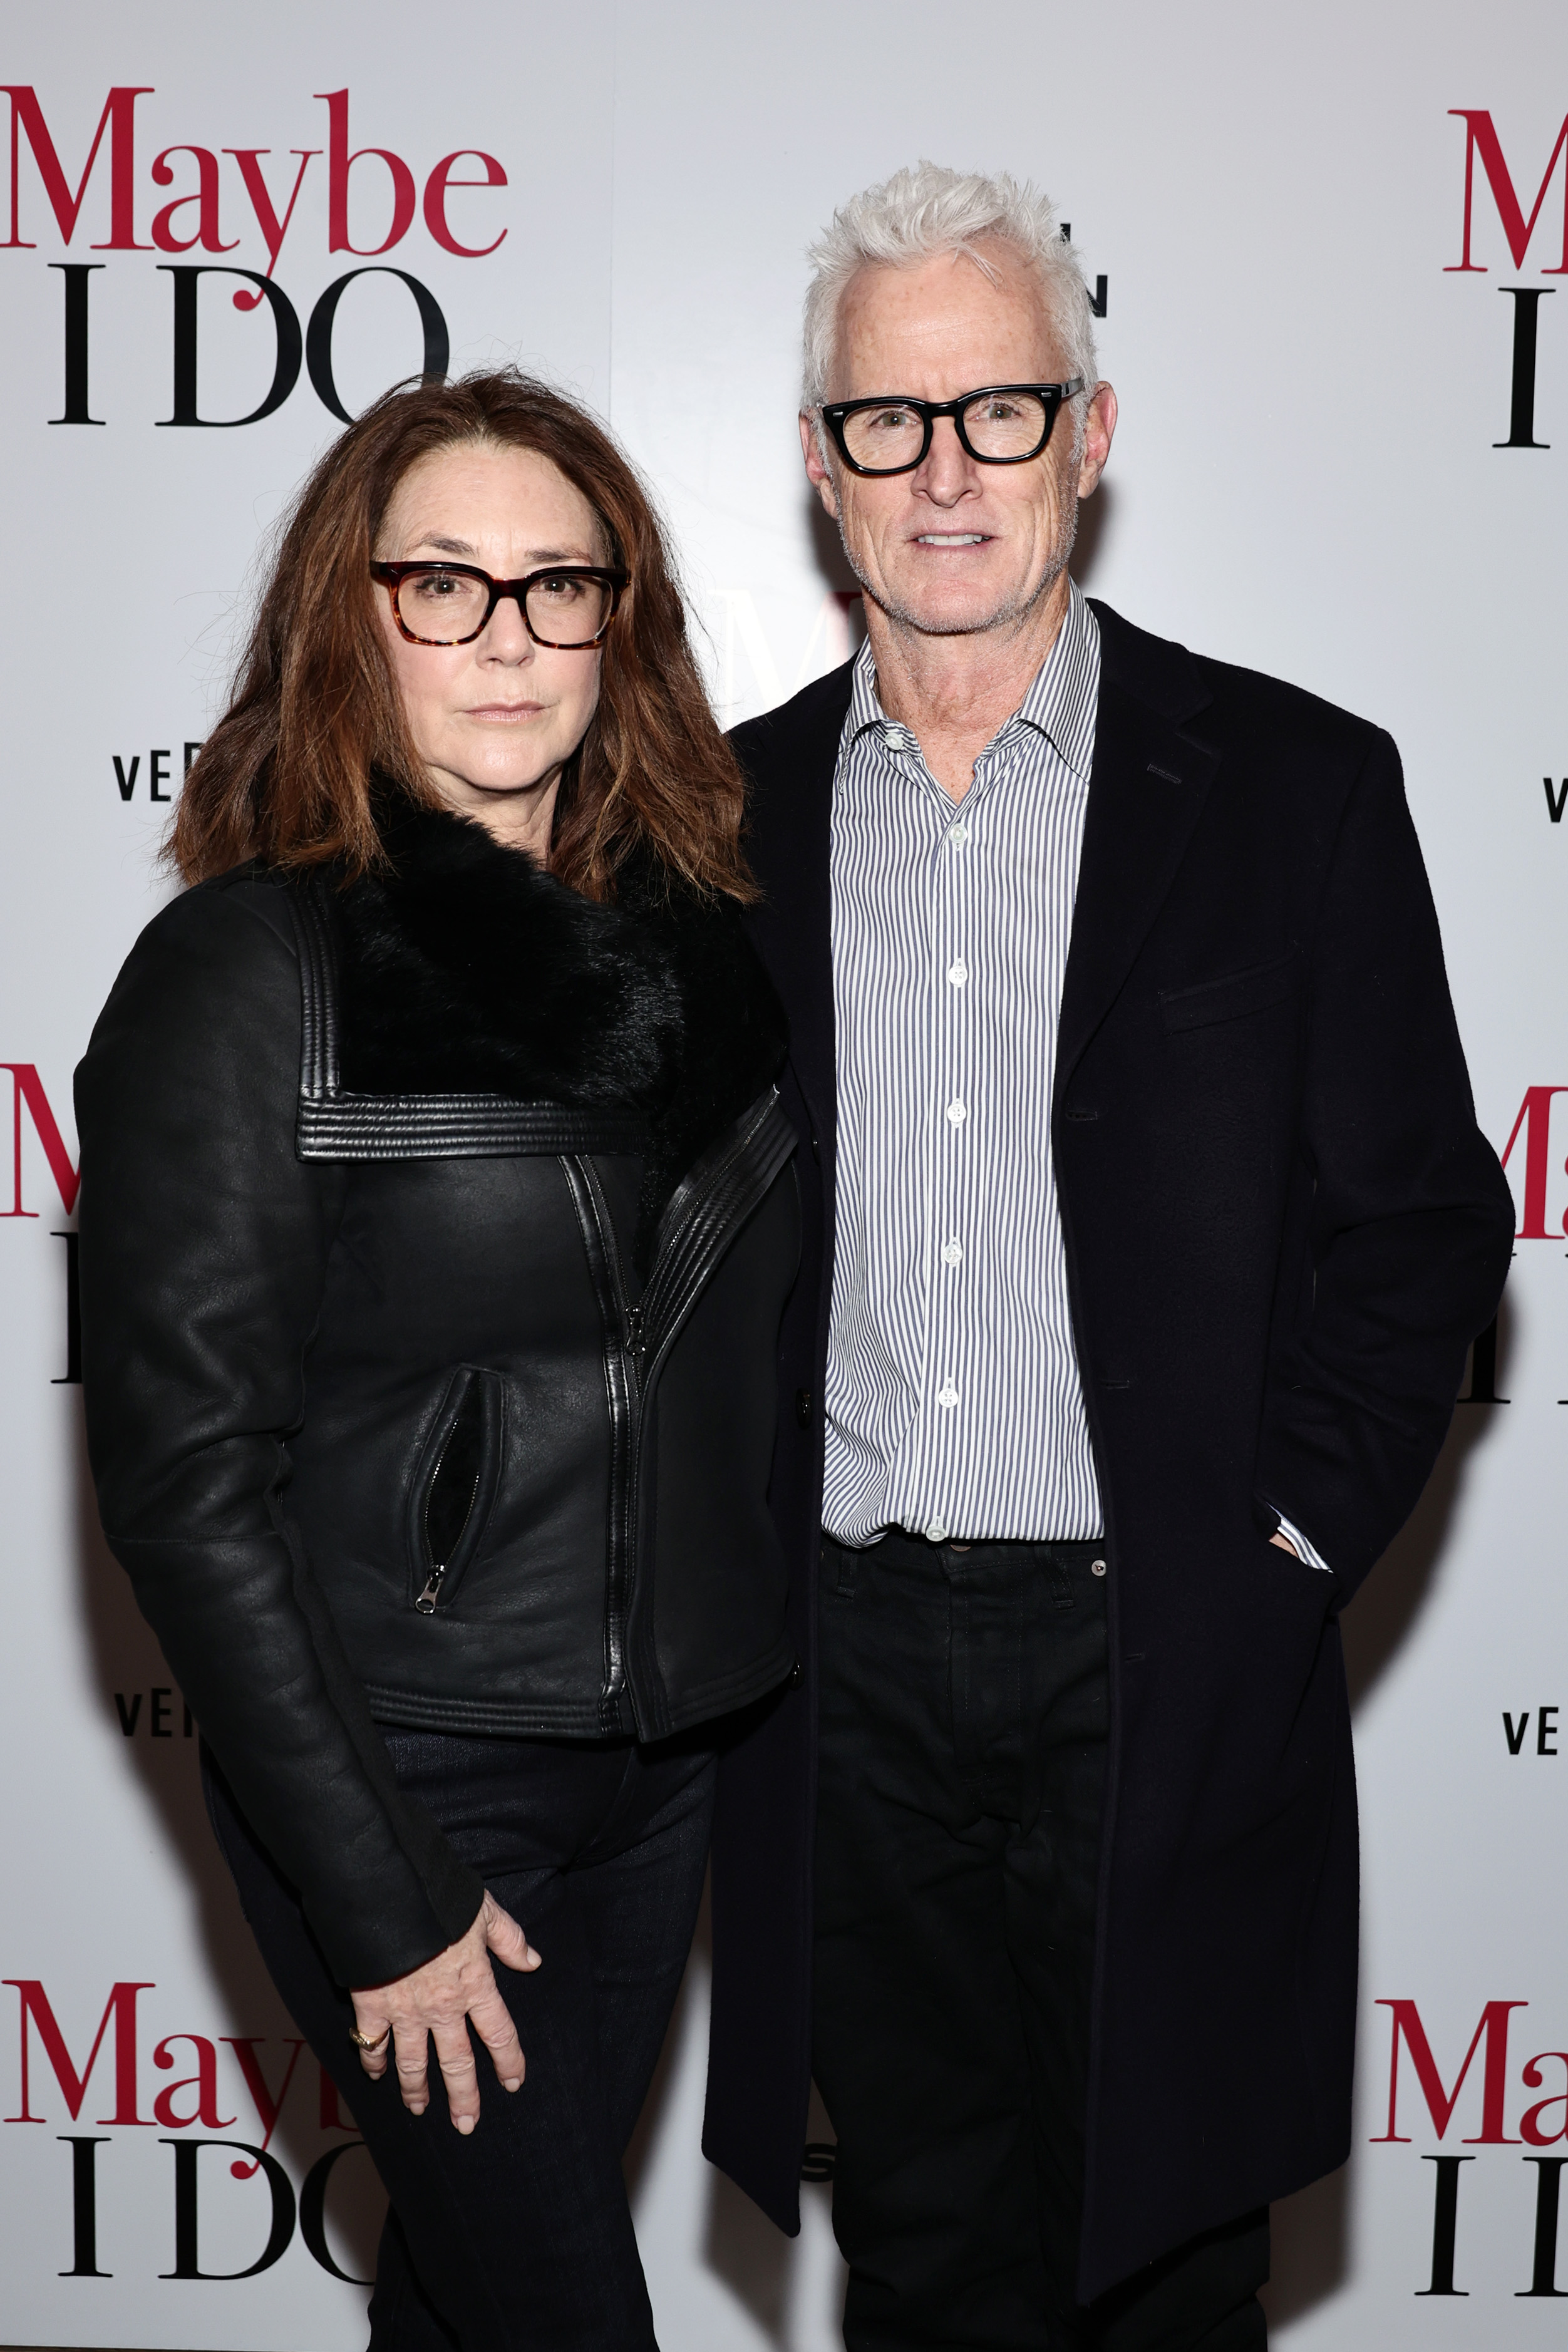 Talia Balsam and John Slattery at the special screening of "Maybe I Do" in New York City on January 17, 2023 | Source: Getty Images